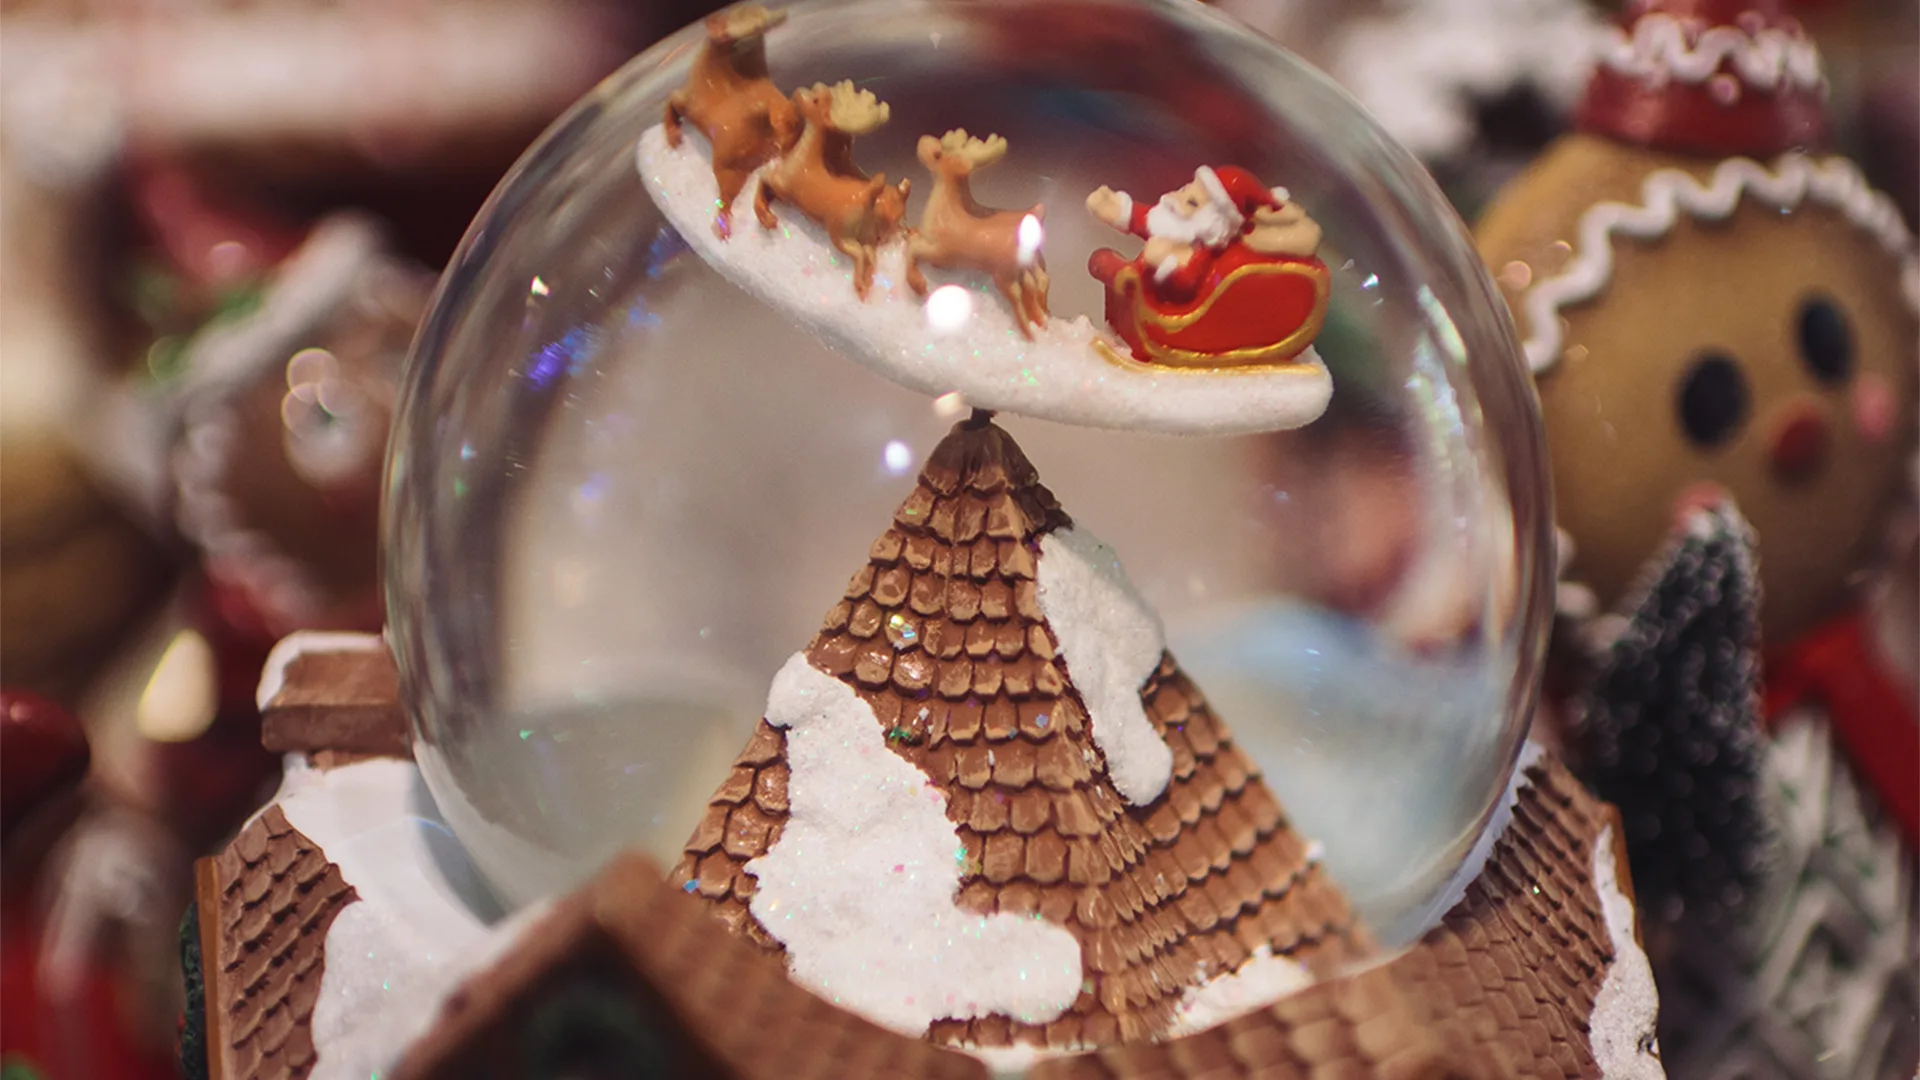 Christmas snowglobe with Santa and his reindeer in it